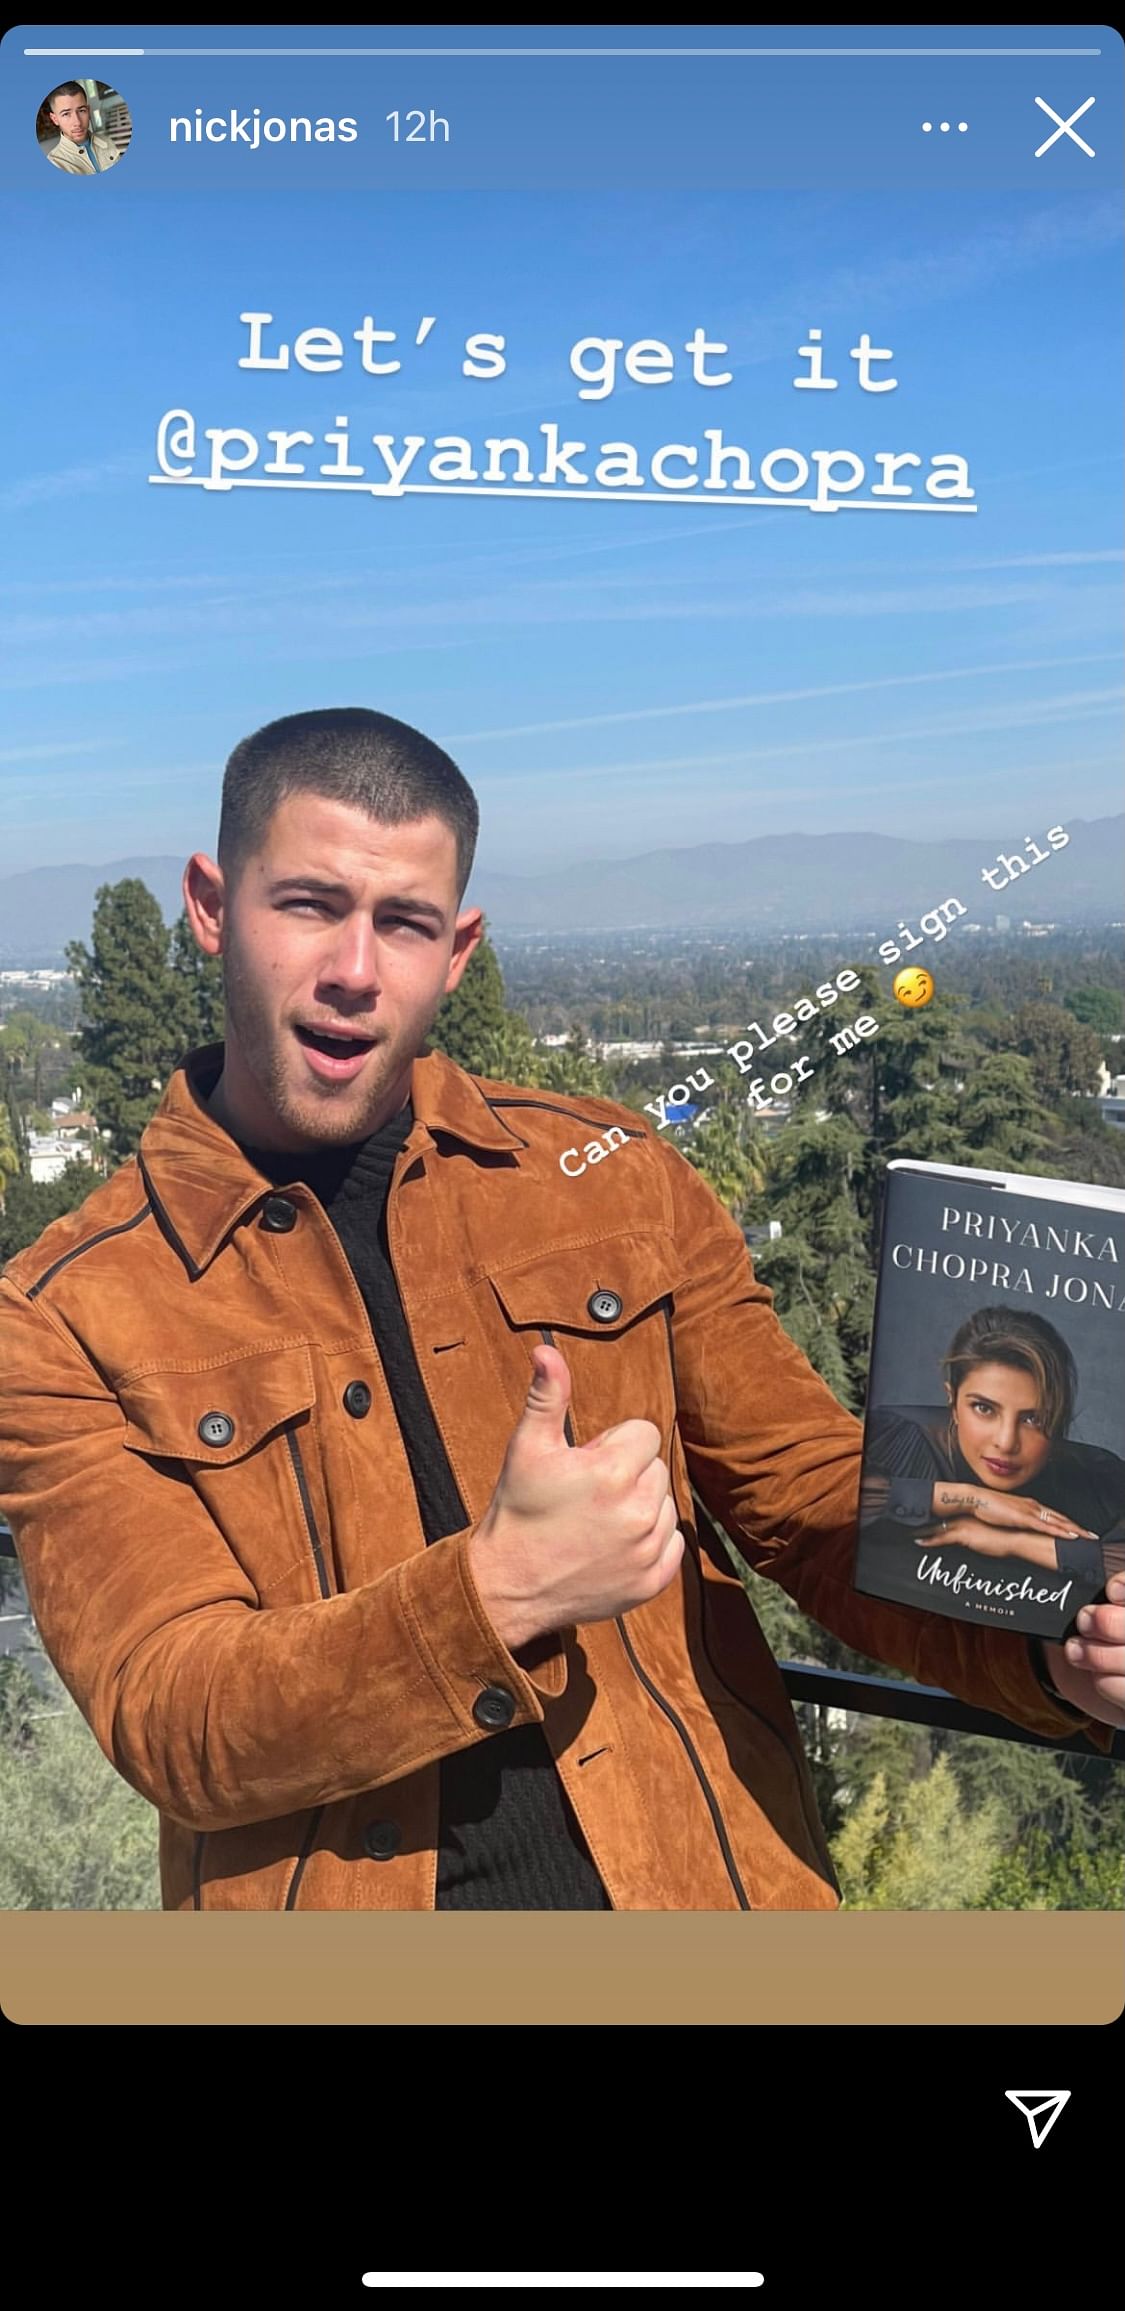 Nick Jonas takes to Instagram to ask Priyanka Chopra for an autographed copy of her book “Unfinished”.